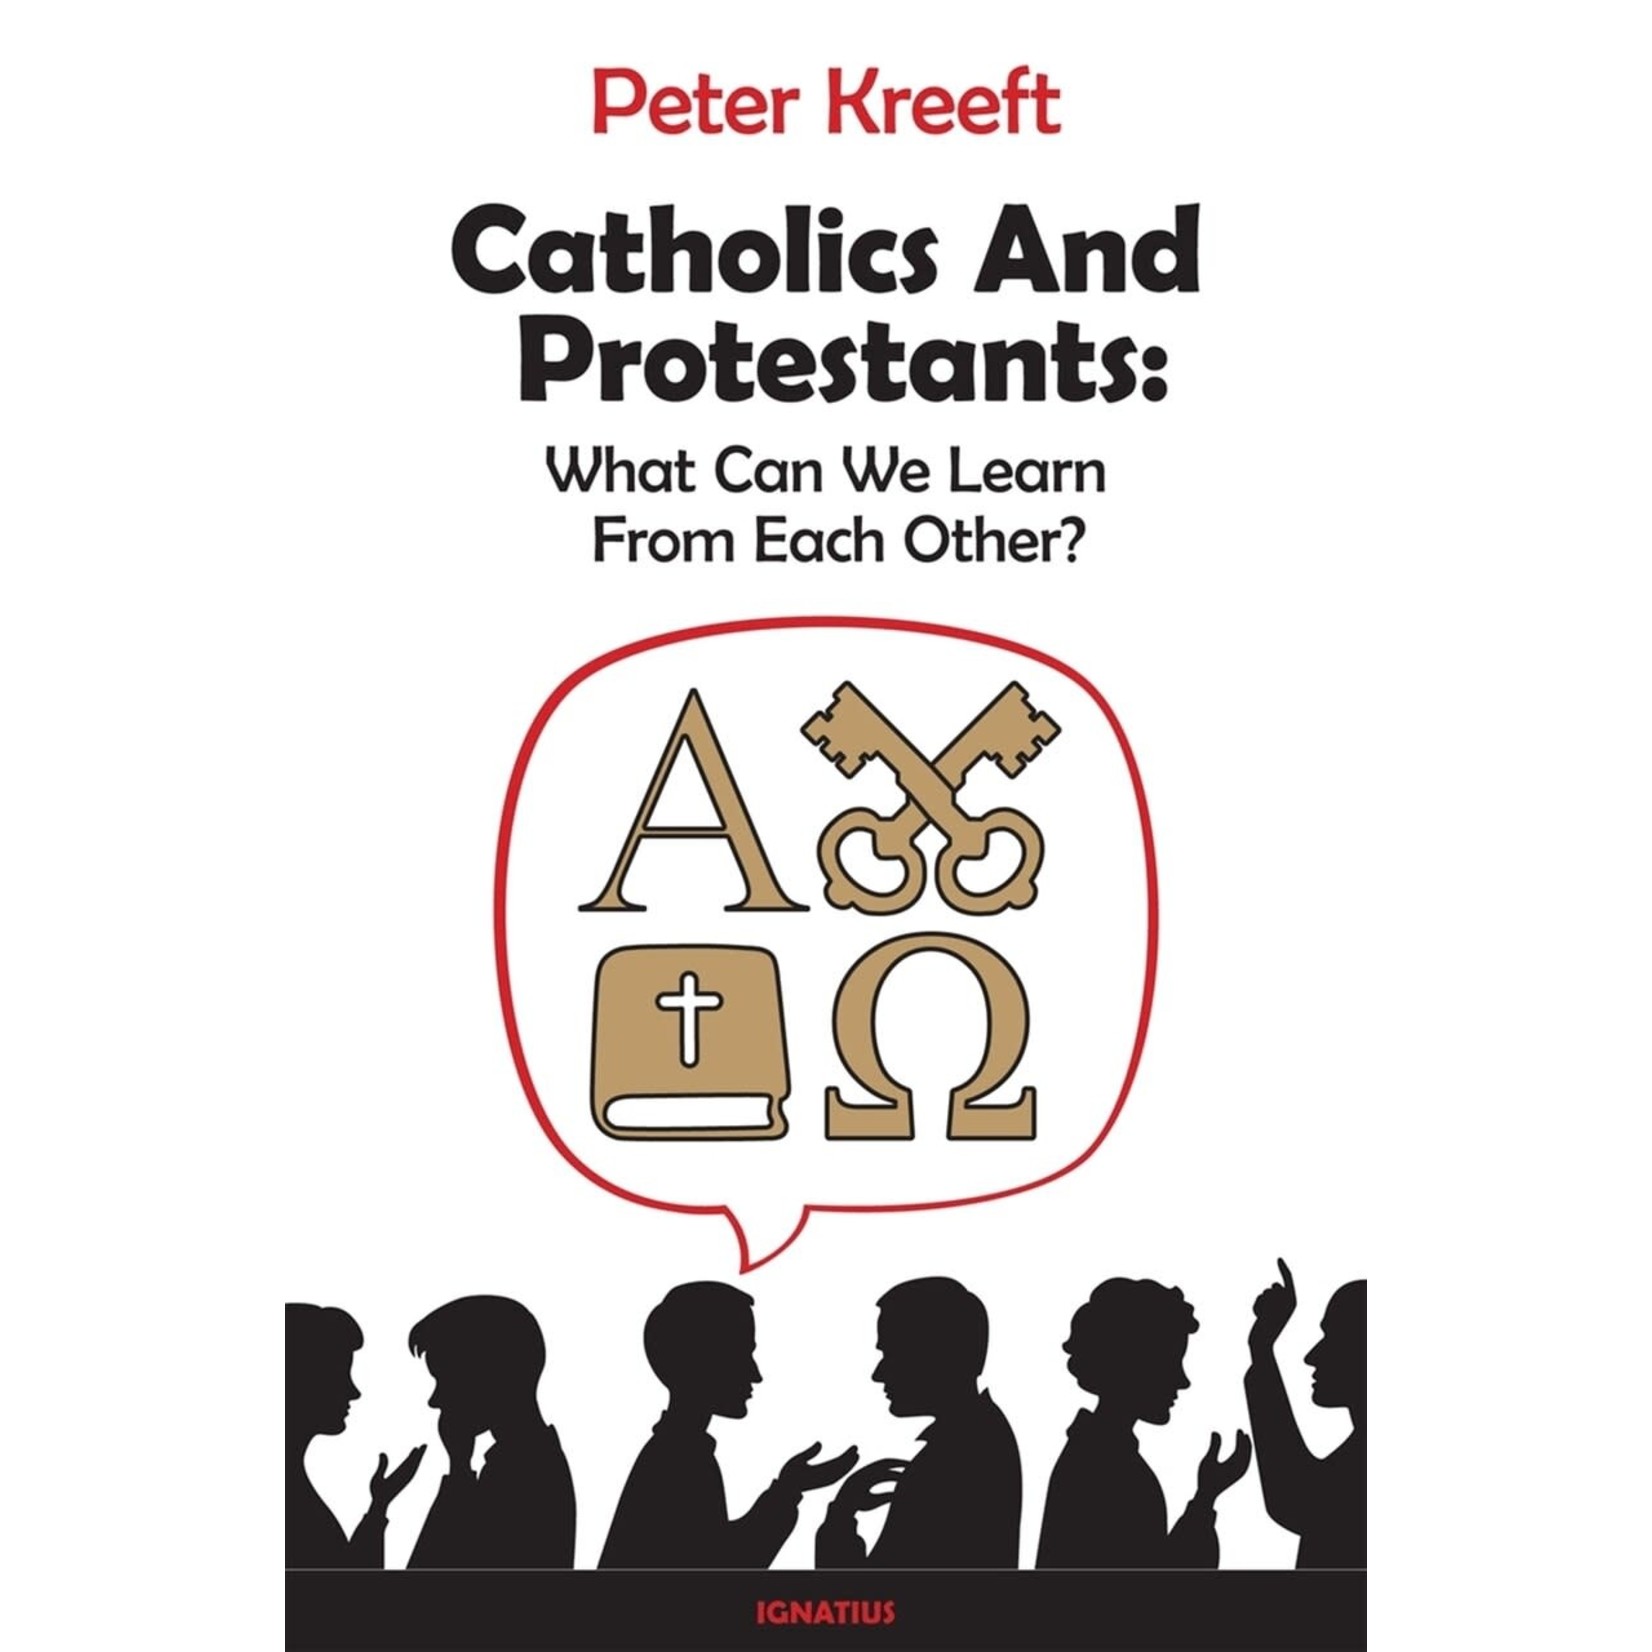 Catholics and Protestants: What Can We Learn From Each Other?